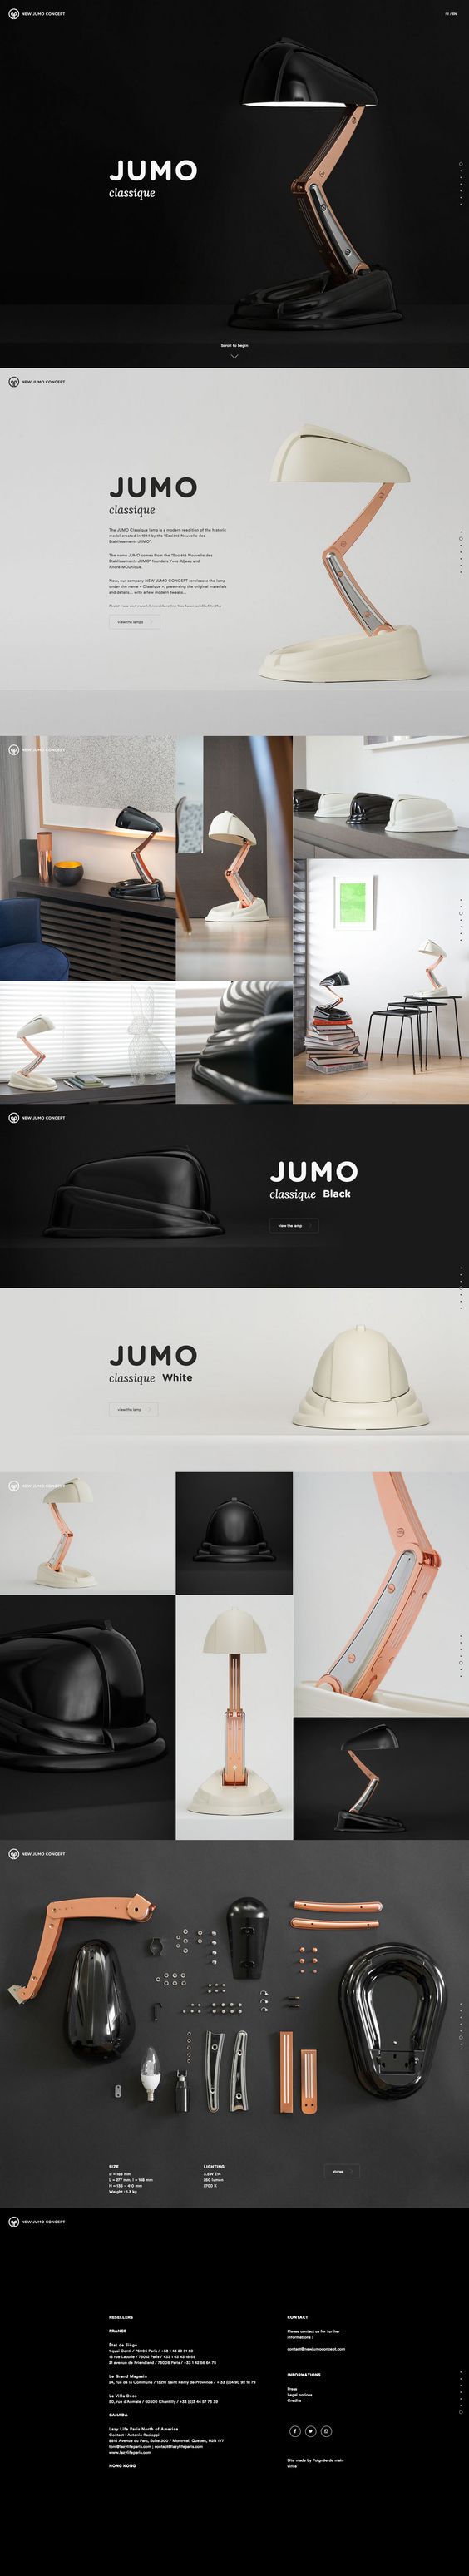 Jumo Classique. Functional, easy to store, and beautiful to look at. via @Matt Frisbie #webdesign #design